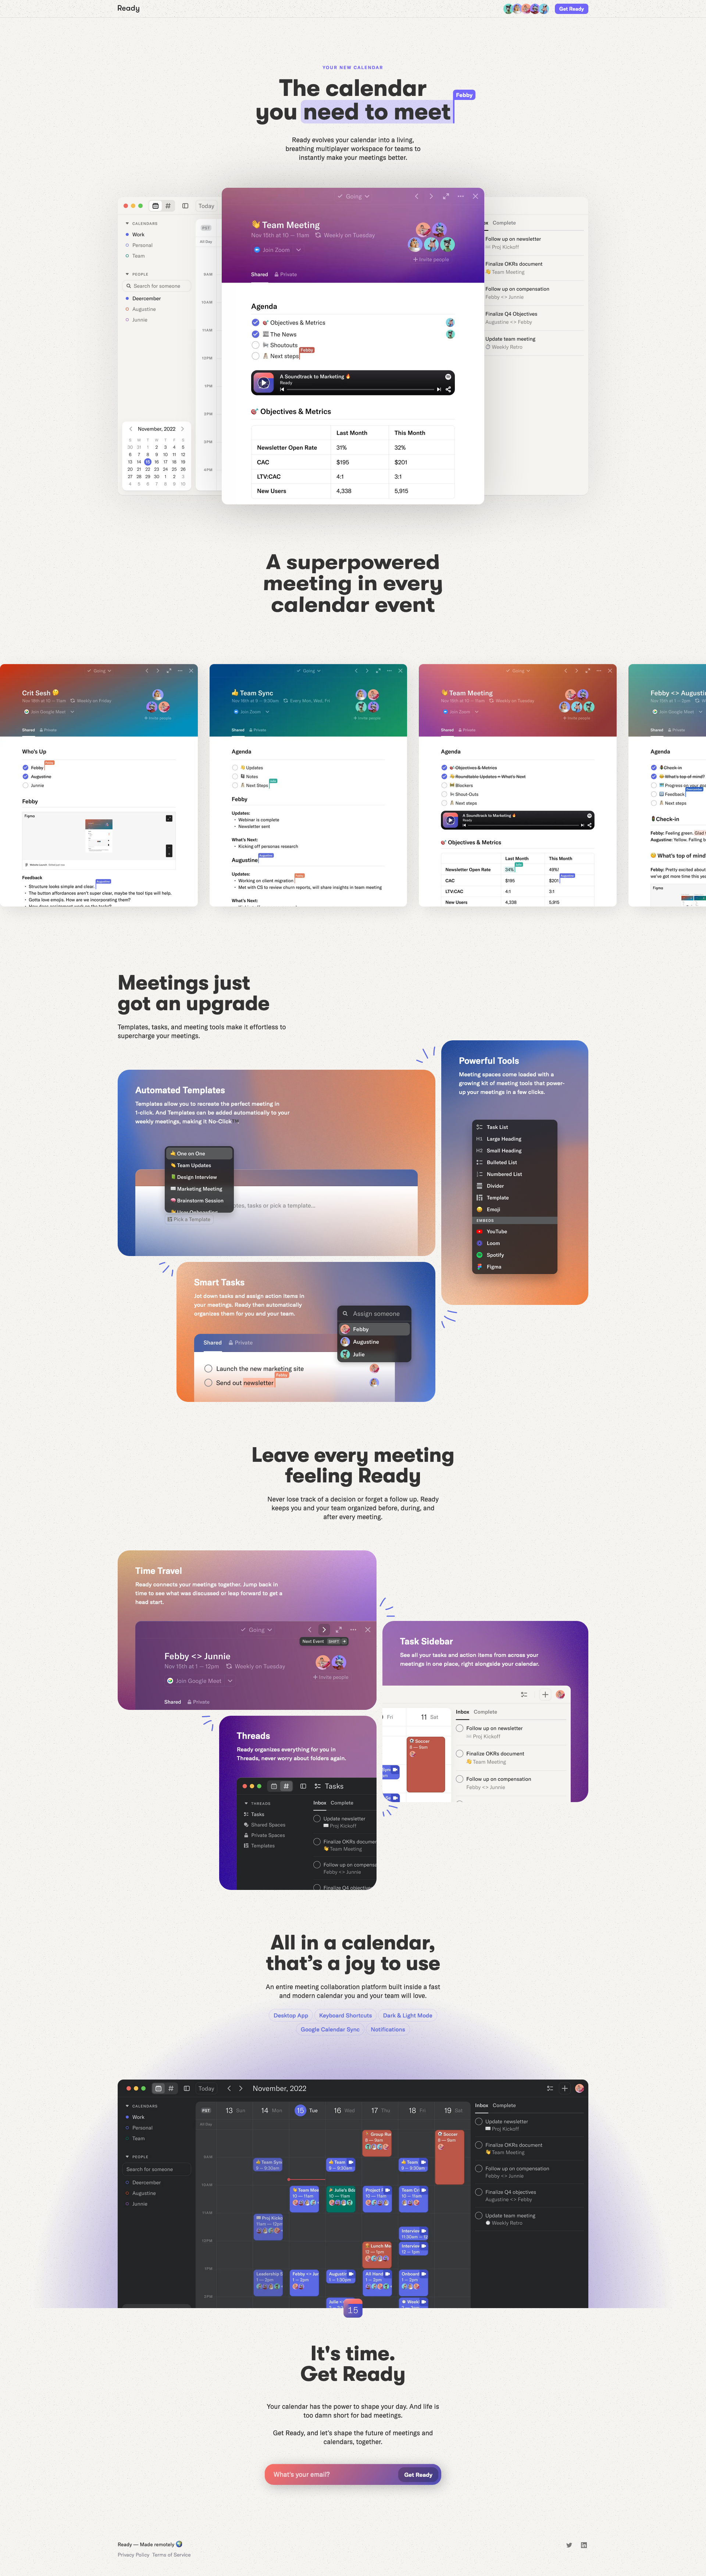 Ready Landing Page Example: The calendar you need to meet. Ready evolves your calendar into a living, breathing multiplayer workspace for teams to instantly make your meetings better.